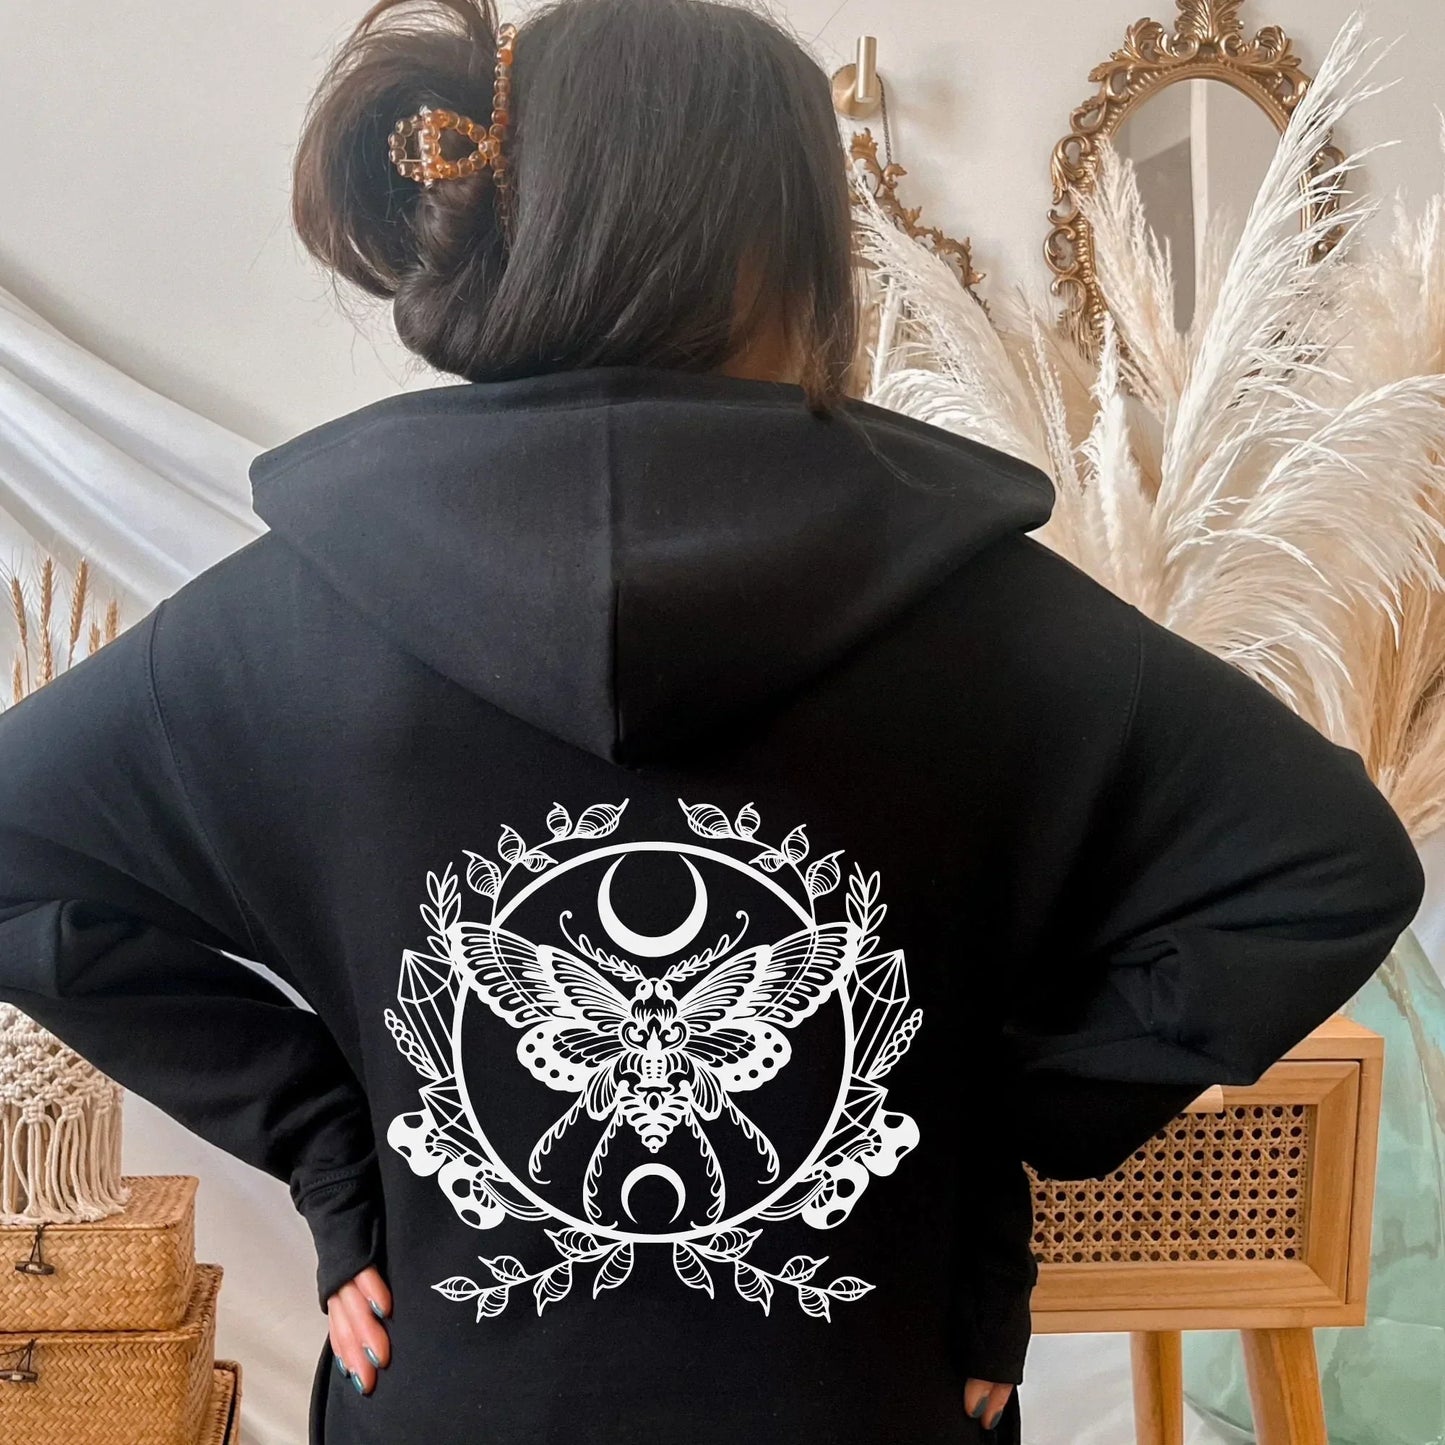 Luna Moth Zip Up Hoodie, Moon Phases Mystical Full Zip Hoodie, Witchy Aesthetic, Boho Gifts for Her, Hippie Apparel w/ Mushrooms & Crystals HMDesignStudioUS